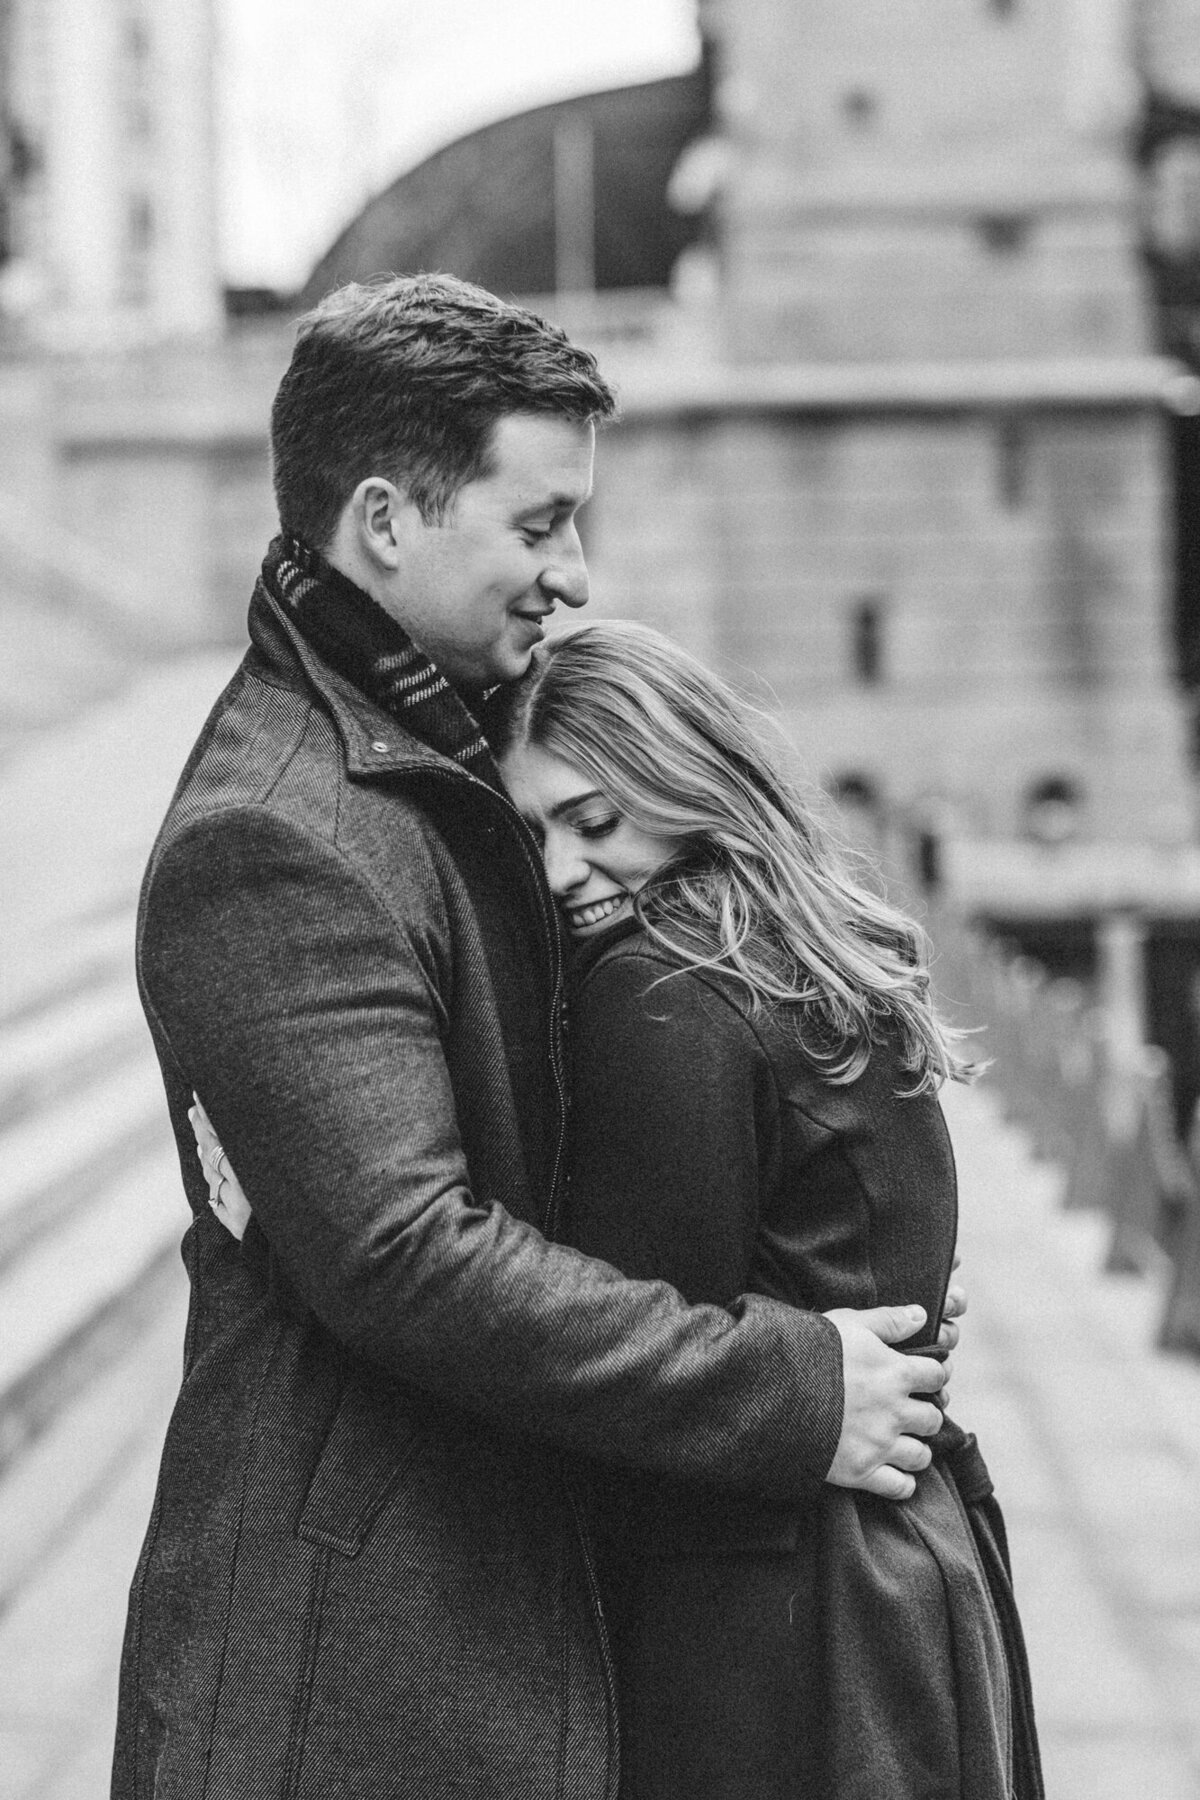 A newly engaged couple share an embrace on a chilly winter day in Chicago